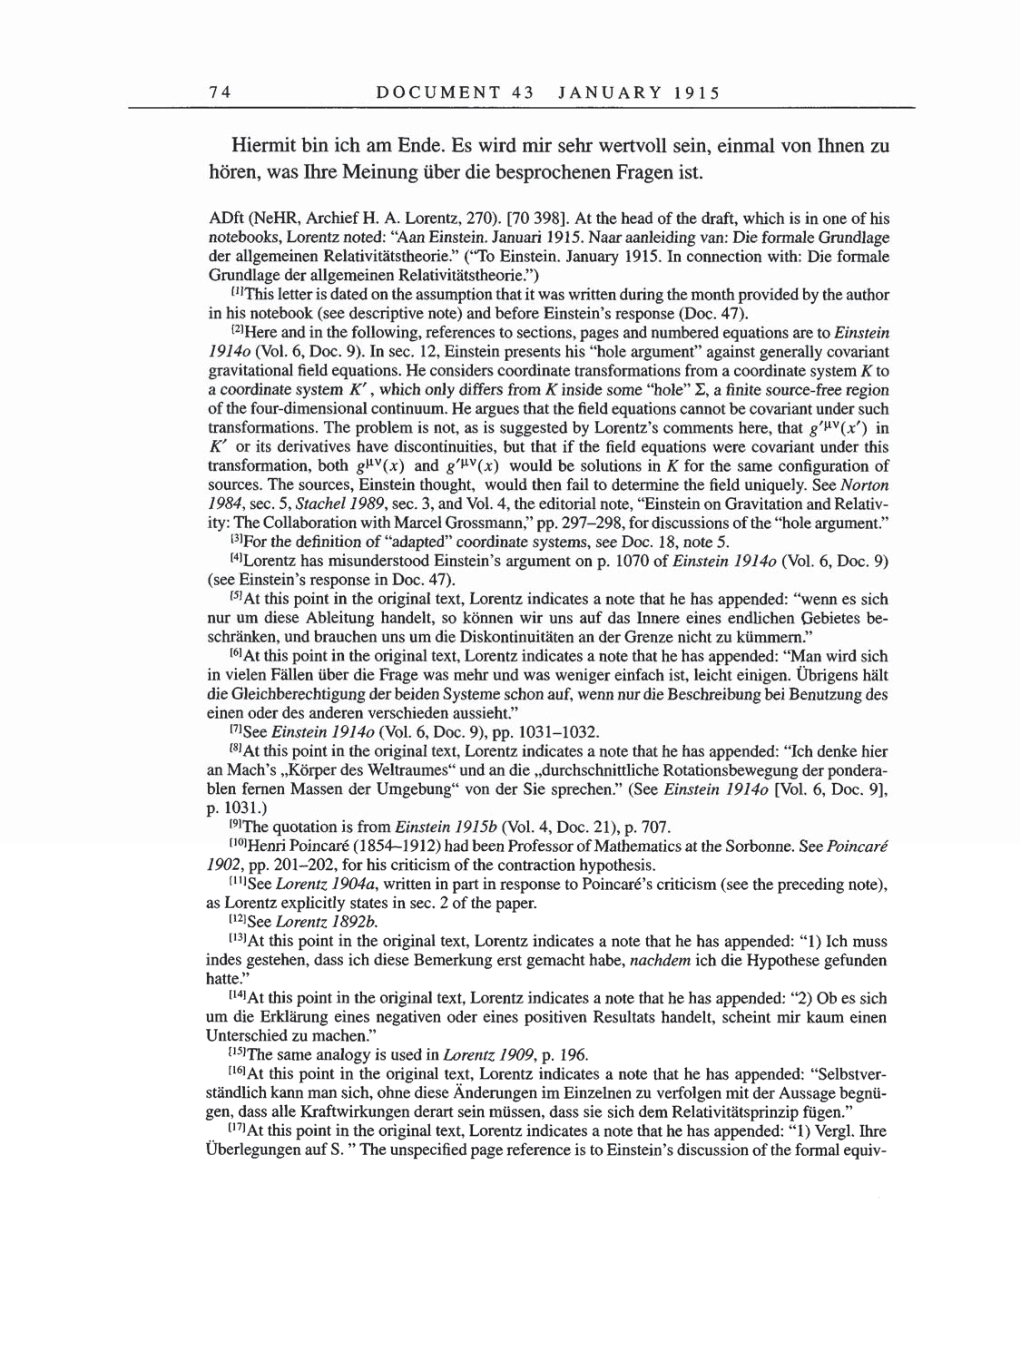 Volume 8, Part A: The Berlin Years: Correspondence 1914-1917 page 74